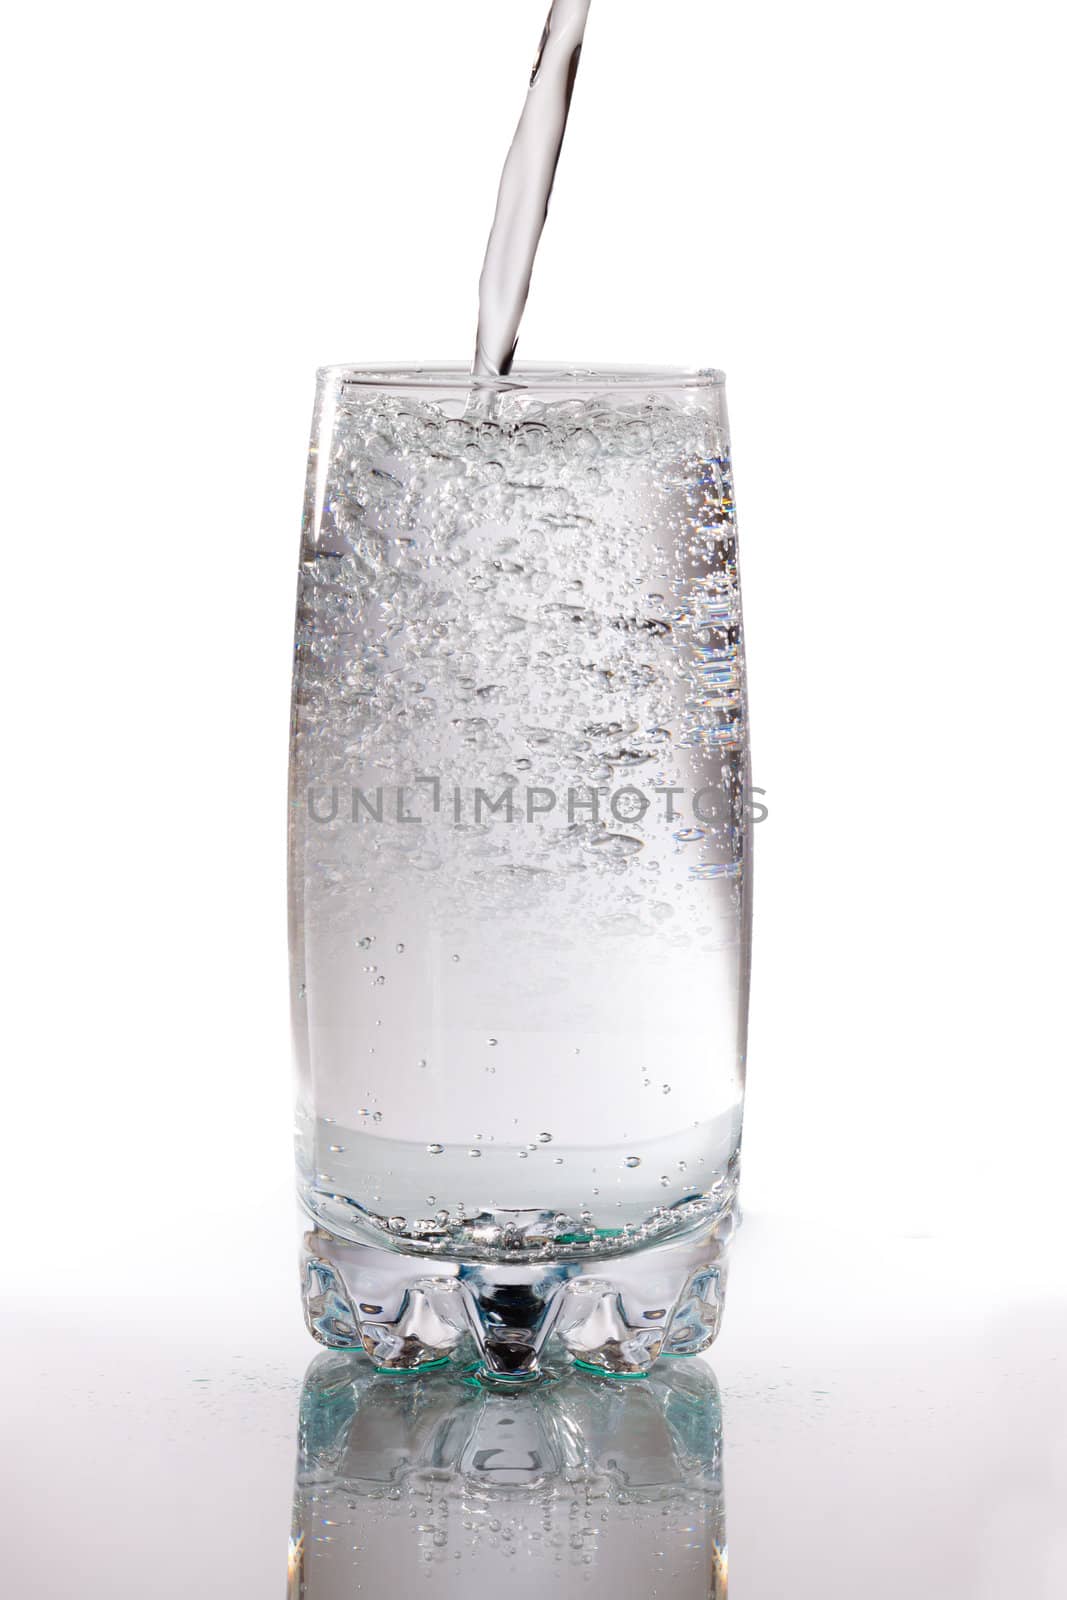 Mineral water poured in to a glass on a white background